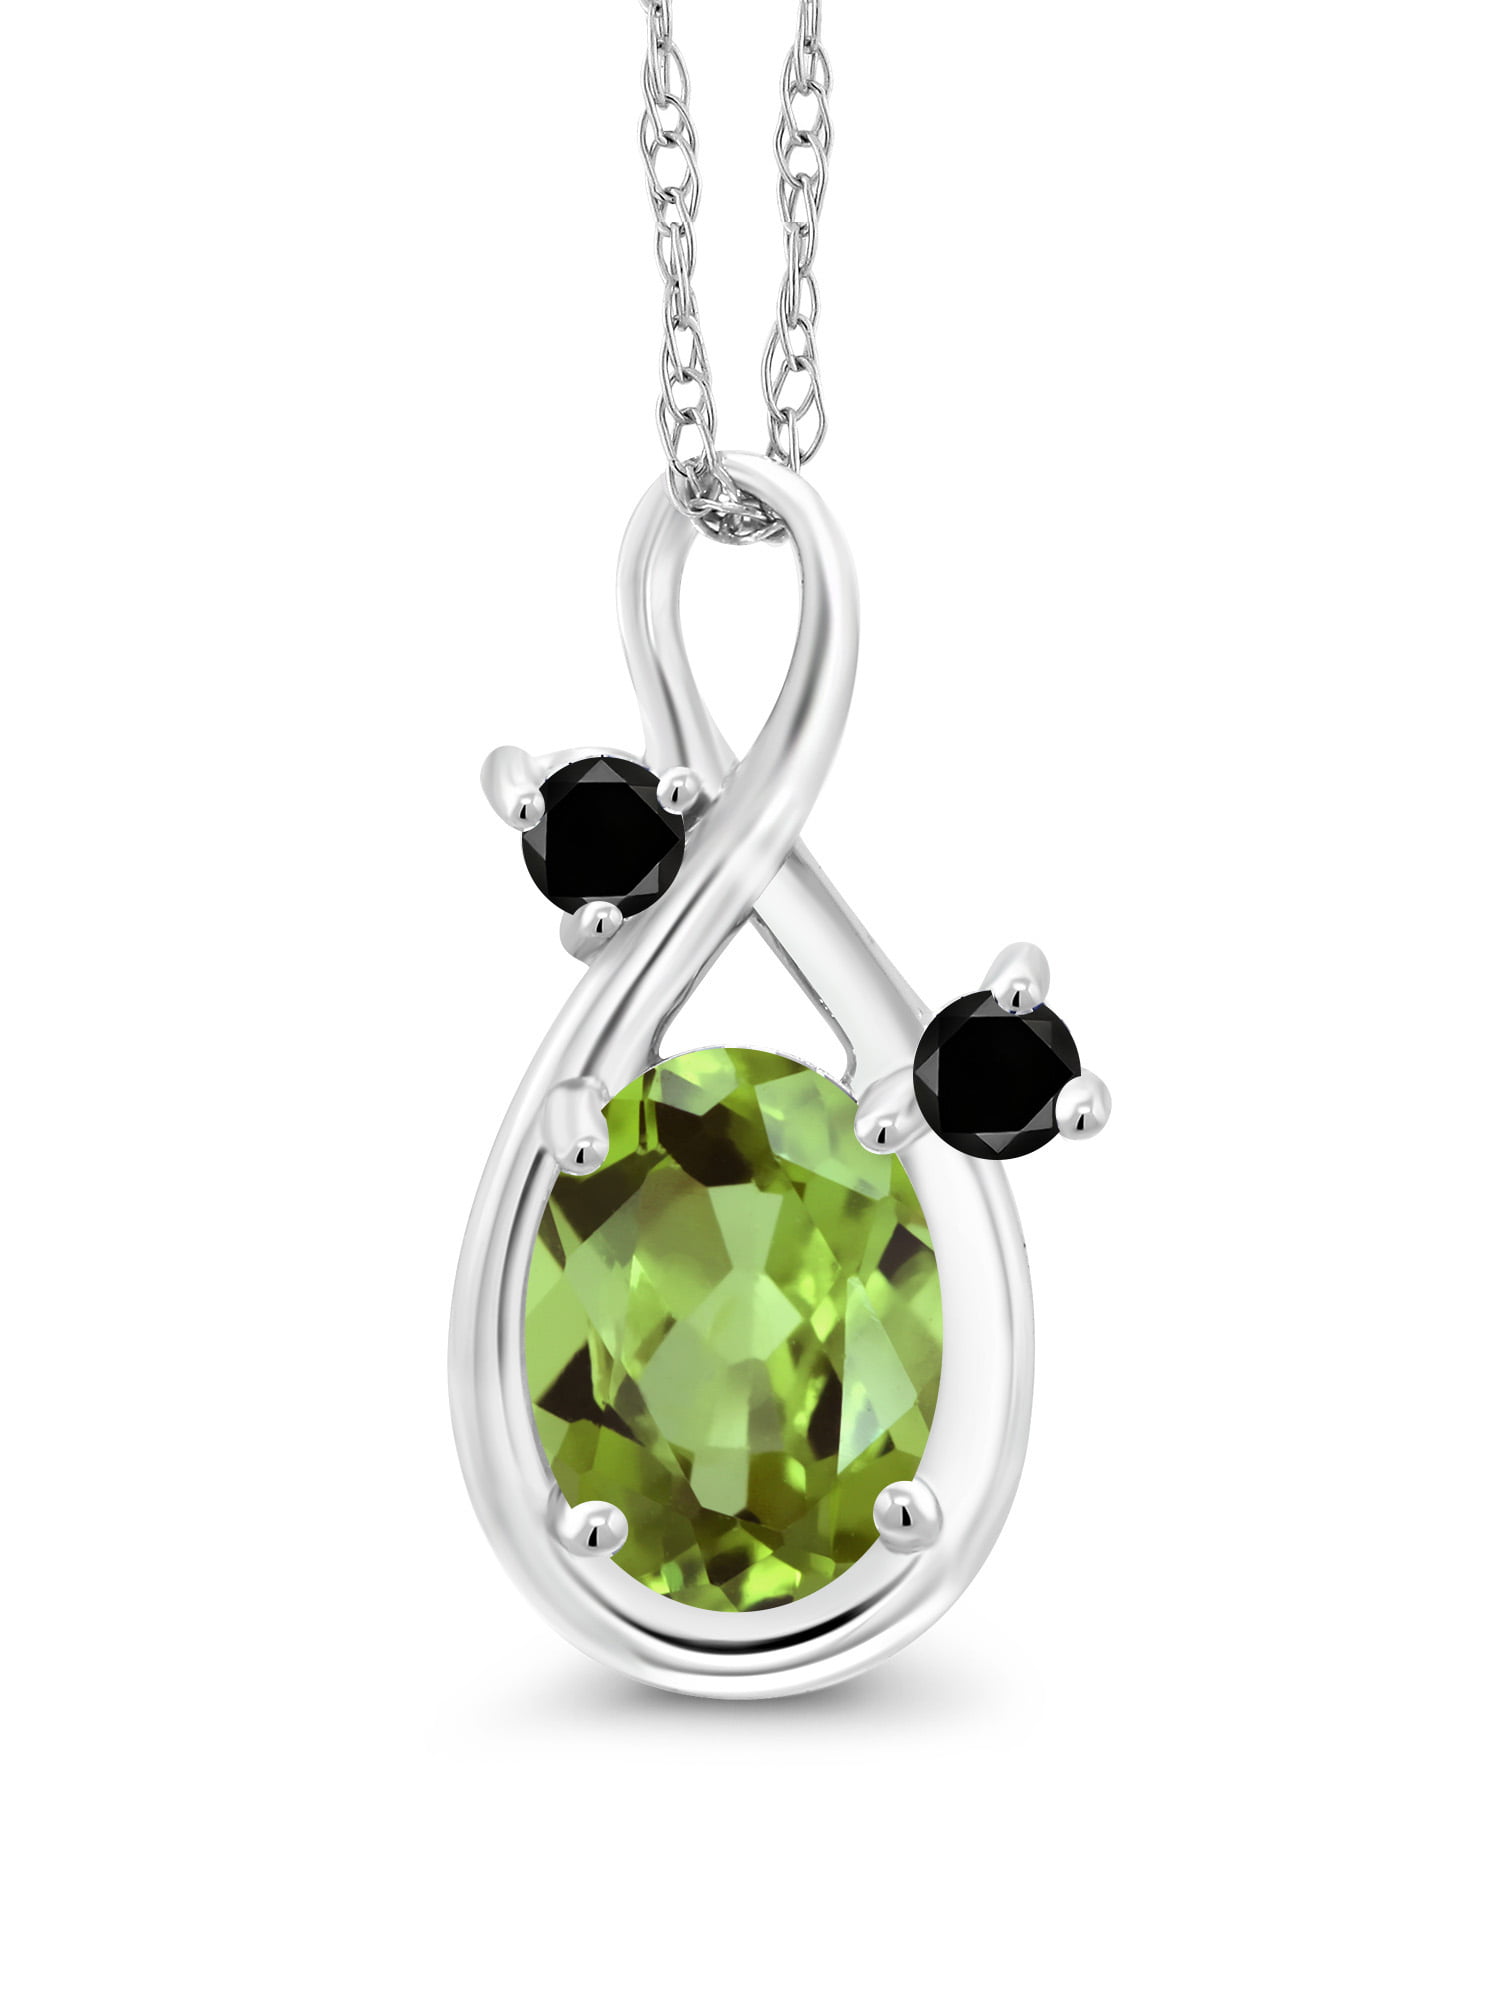 ALARRI 2.25 Carat 14K Solid Gold Aurora Leigh Peridot Necklace with 22 Inch Chain Length